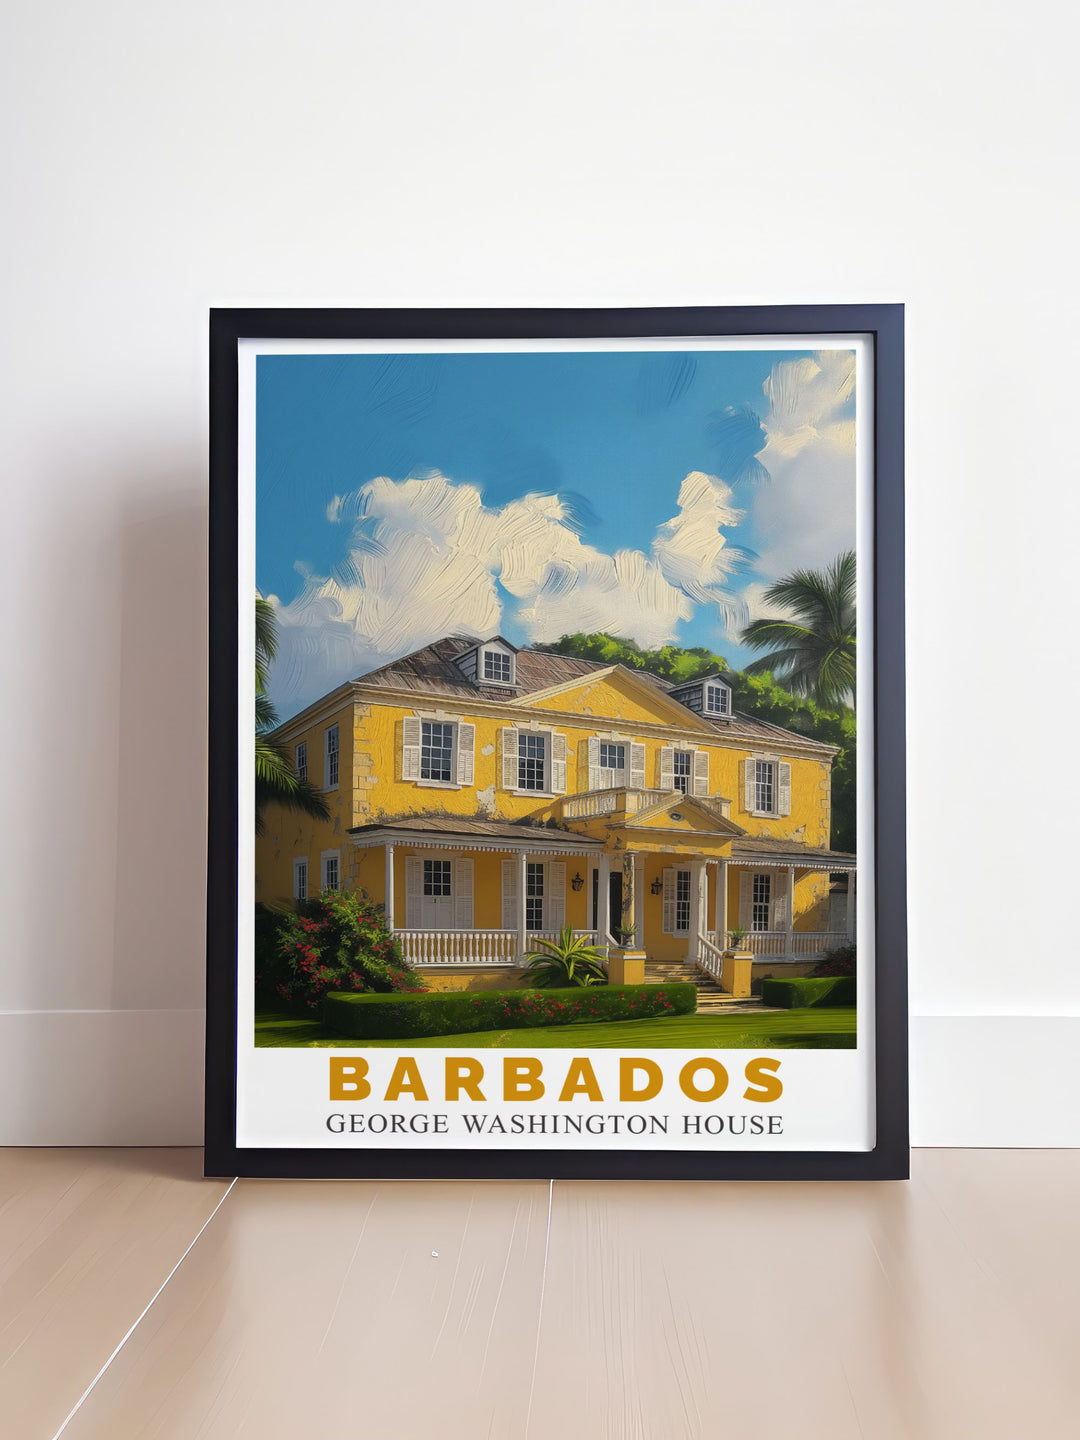 George Washington House poster capturing the historical significance and architectural elegance of this iconic landmark in Barbados, highlighting its connection to one of Americas founding fathers and its role in the islands colonial past.